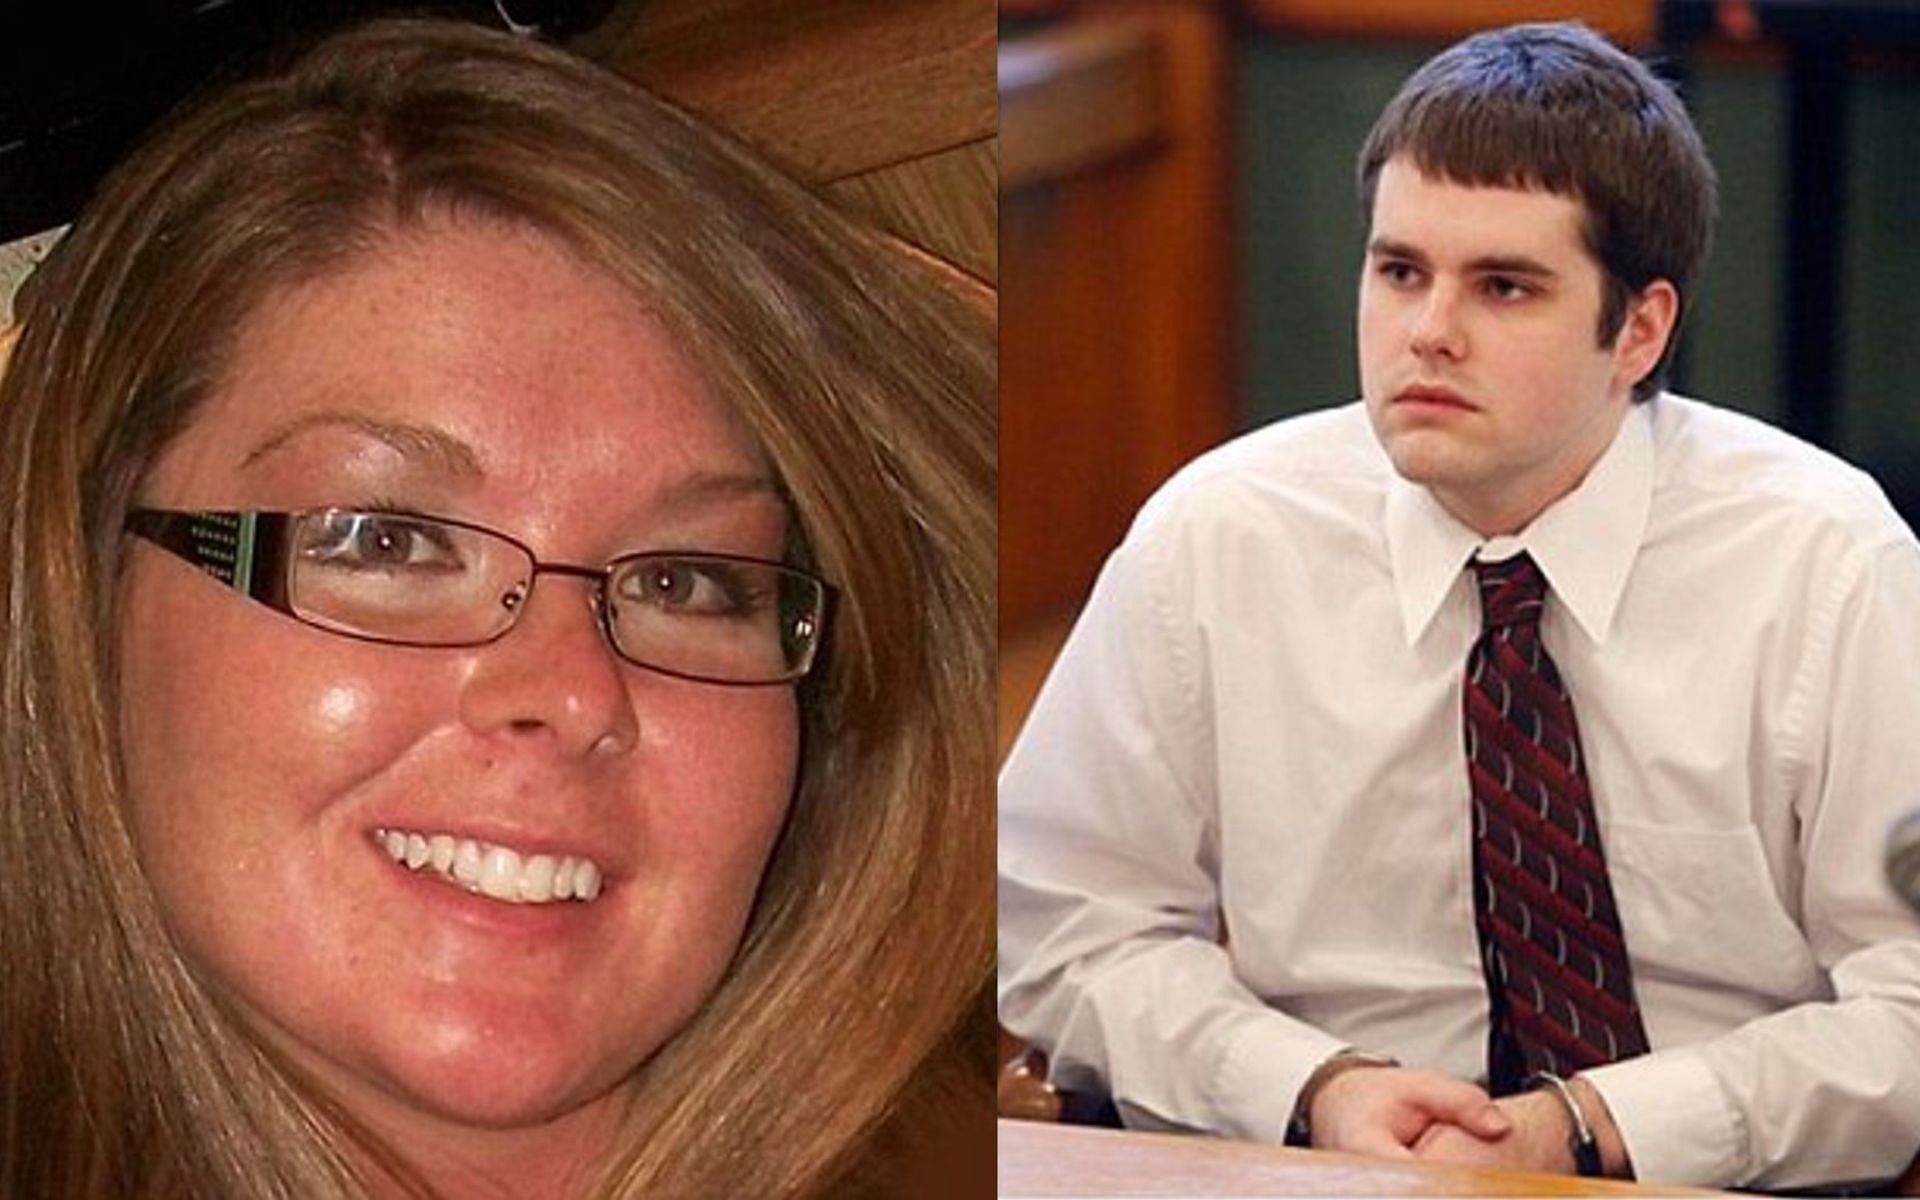 Lisa Techel (left) and Seth Techel in court (right) (Image via Daily Mail)